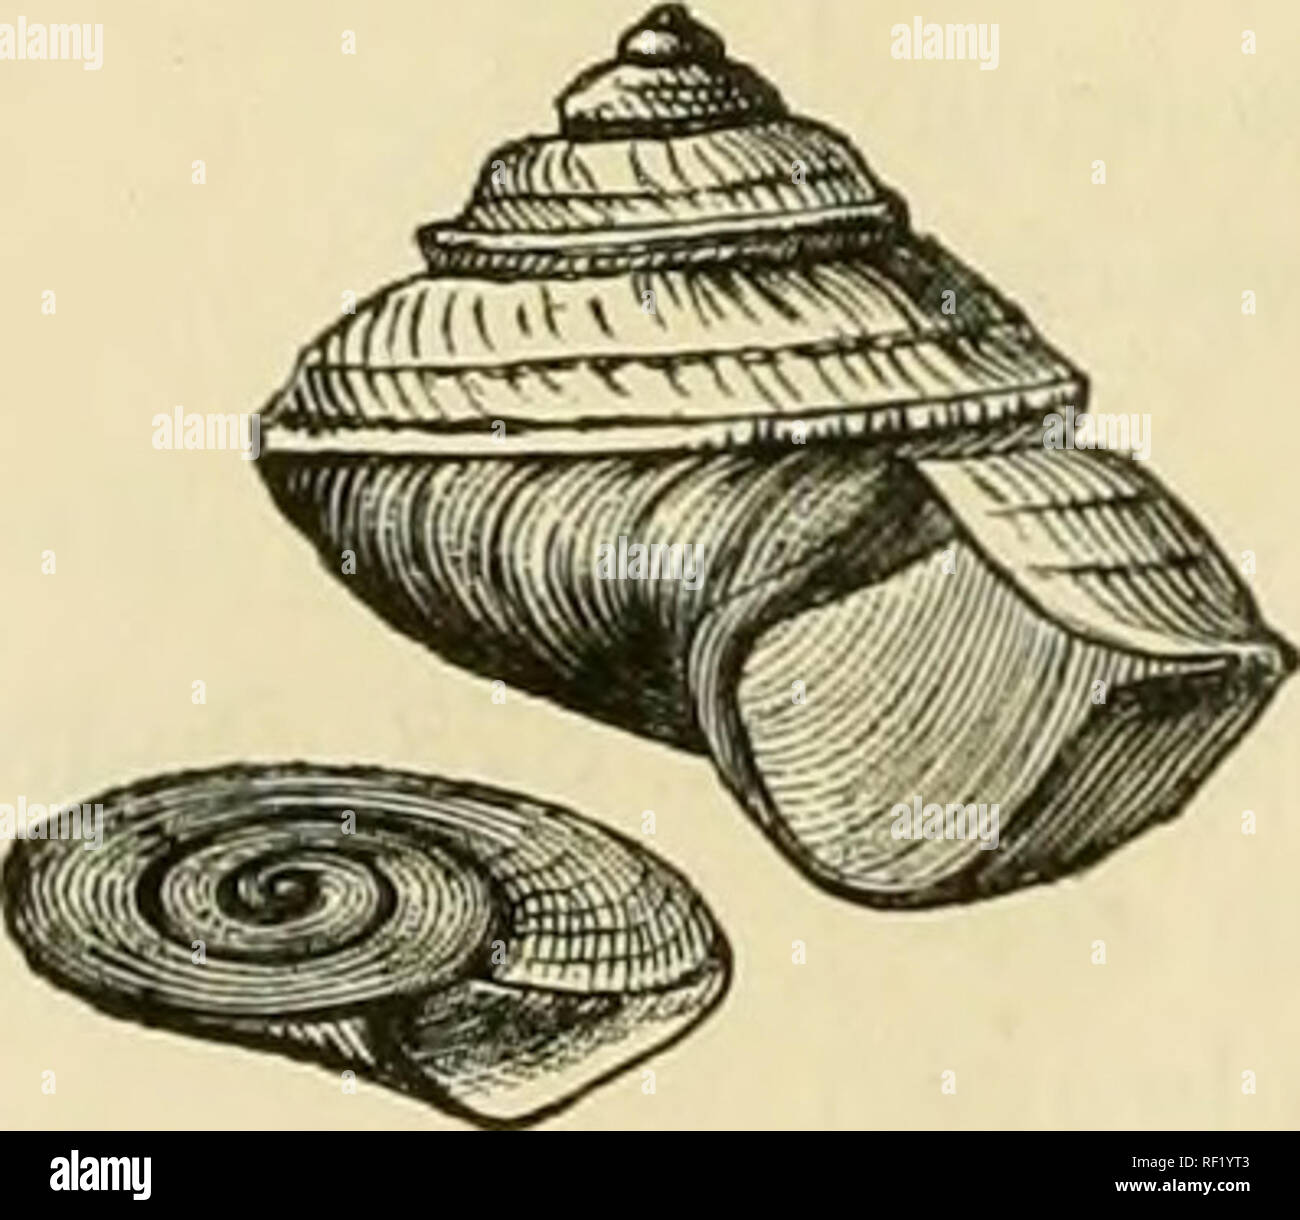 . A catalogue of the collection of Cambrian and Silurian fossils contained in the Geological Museum of the University of Cambridge. Paleontology; Paleontology. Capulus??. 290.. p. 292? Acroculia, Phillips. More spiral than Capulus, and often spinose or tubercular. Acroculia haliotis, Sow. (Siluria, 2nd ed. pi. 24, fig. 9). A most characteristic Wenlock shell —the food of Crinoids, especially of Marsu- piocrinus. Acroculia, sp. 2. Acroculia, sp. 3. Very much angulated whorls, a small species. Acroculia, sp. 4. Acroculia prototypa, Phil. (Siluria, 2nd ed. pi. 24, fig. 8). Very much like a Nerita Stock Photo